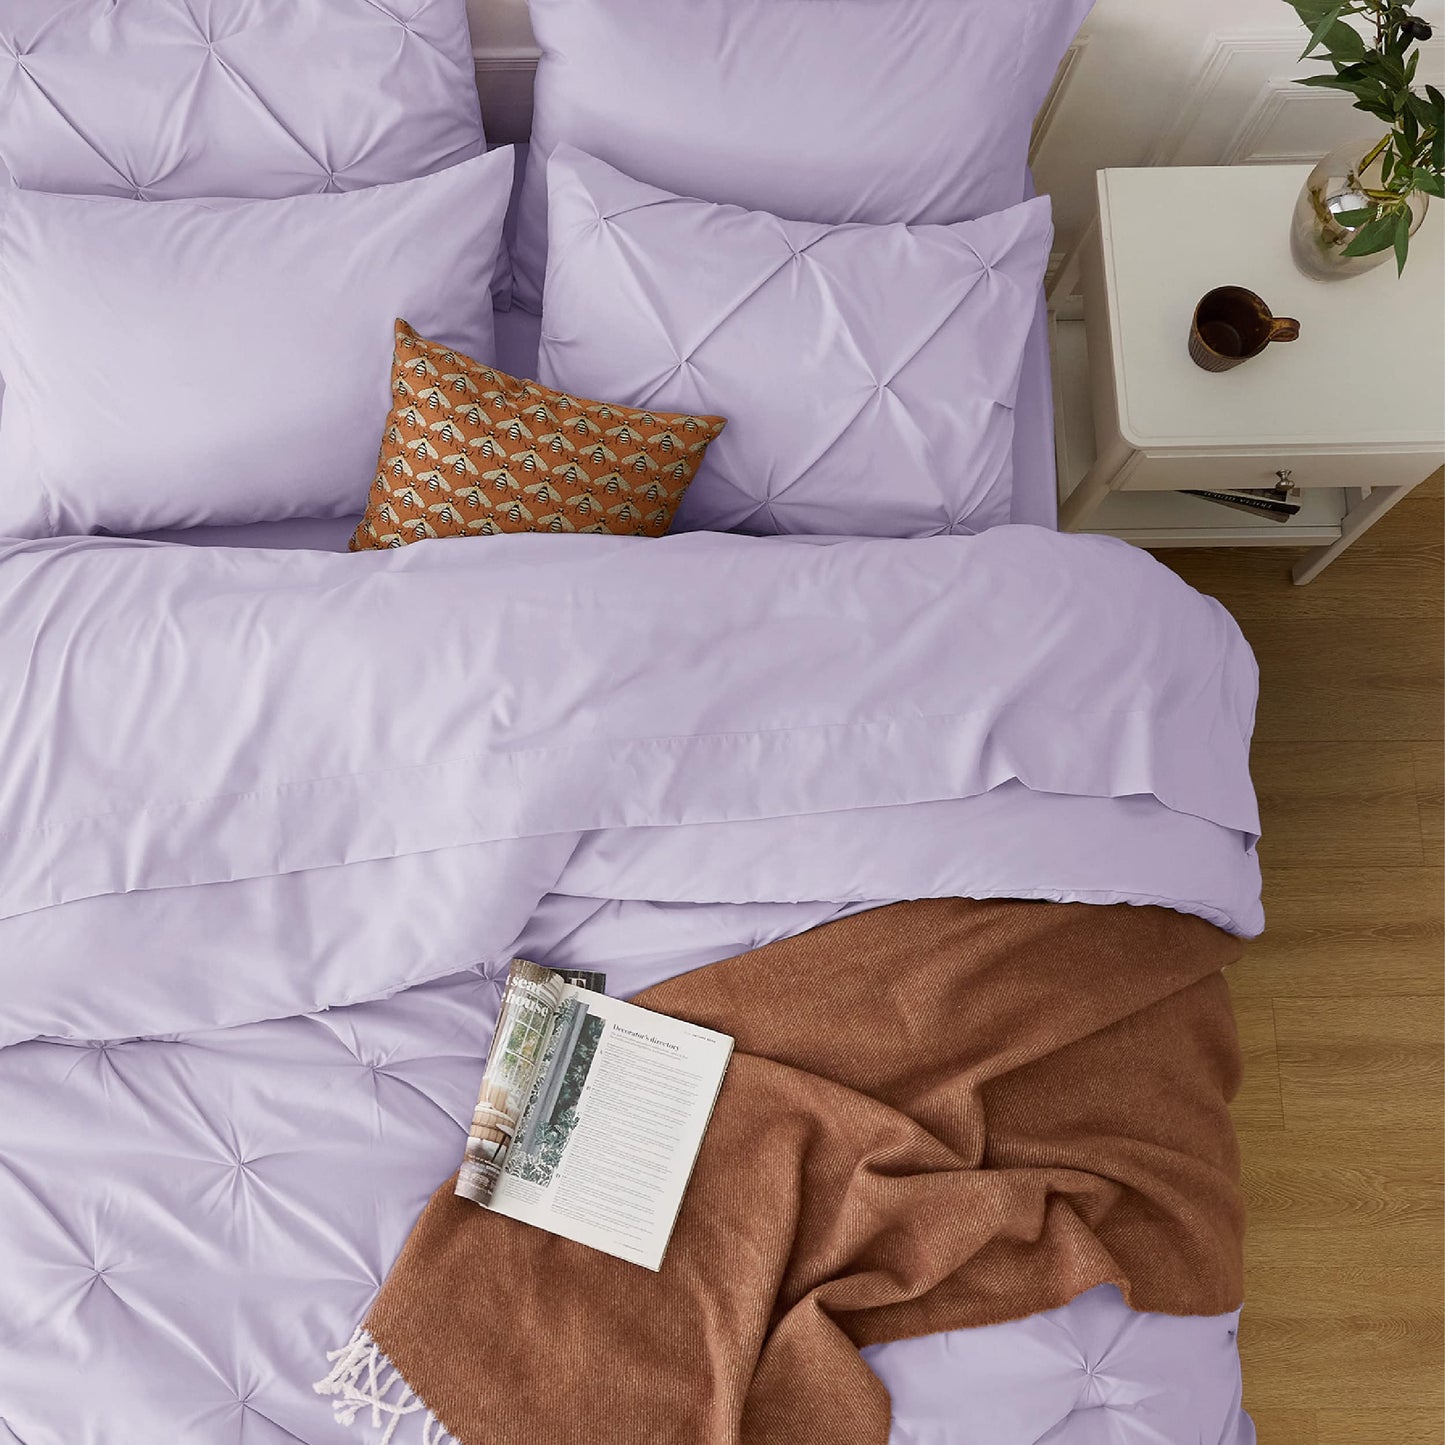 Bedsure Twin Comforter Set with Sheets - 5 Pieces Twin Bedding Sets, Pinch Pleat Light Purple Twin Bed in a Bag with Comforter, Sheets, Pillowcase & Sham